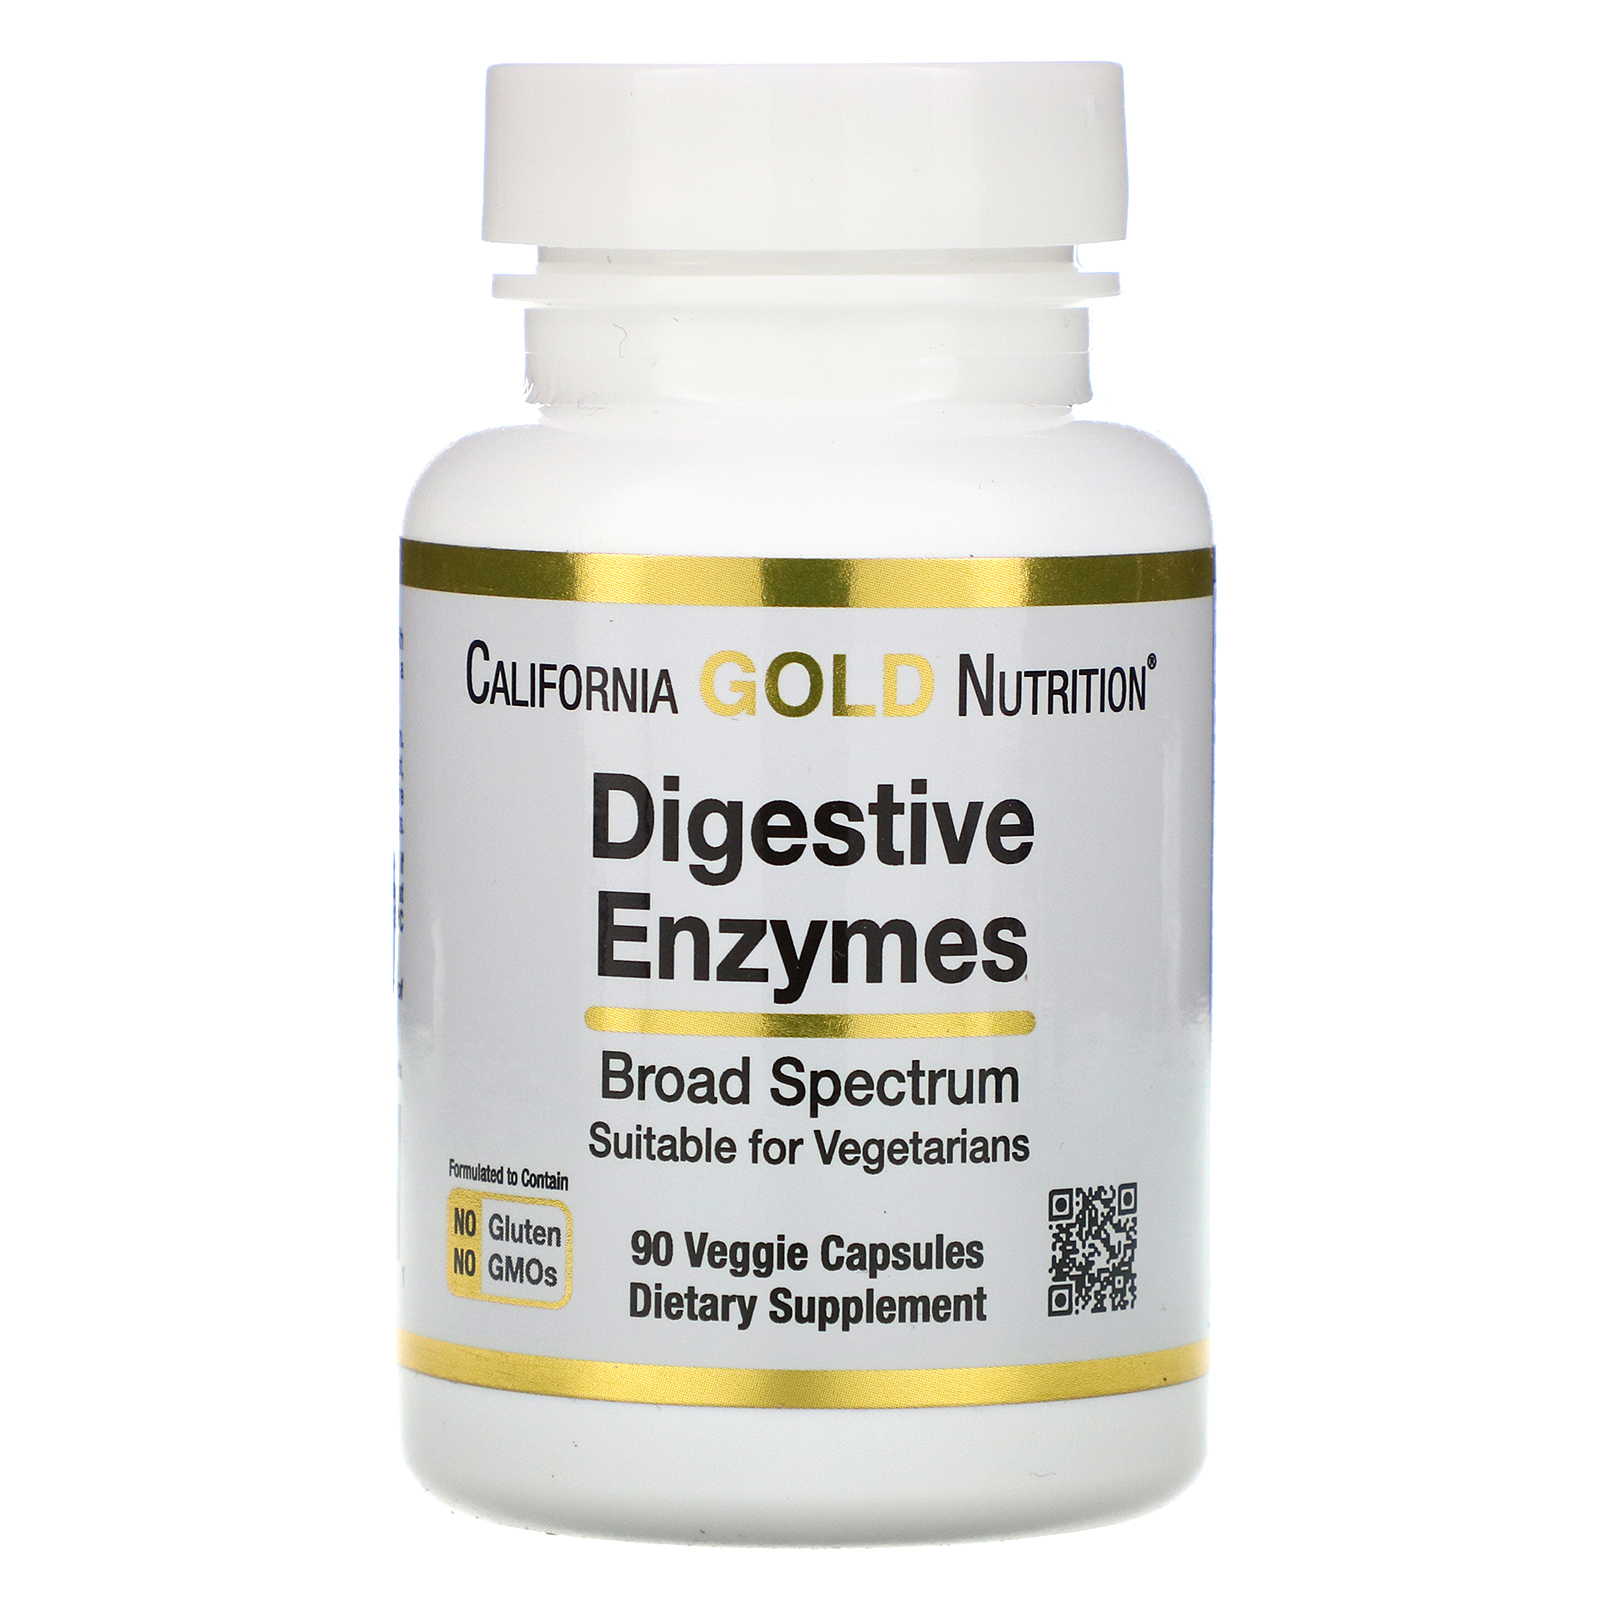 California Gold Nutrition Digestive Enzymes Broad Spectrum